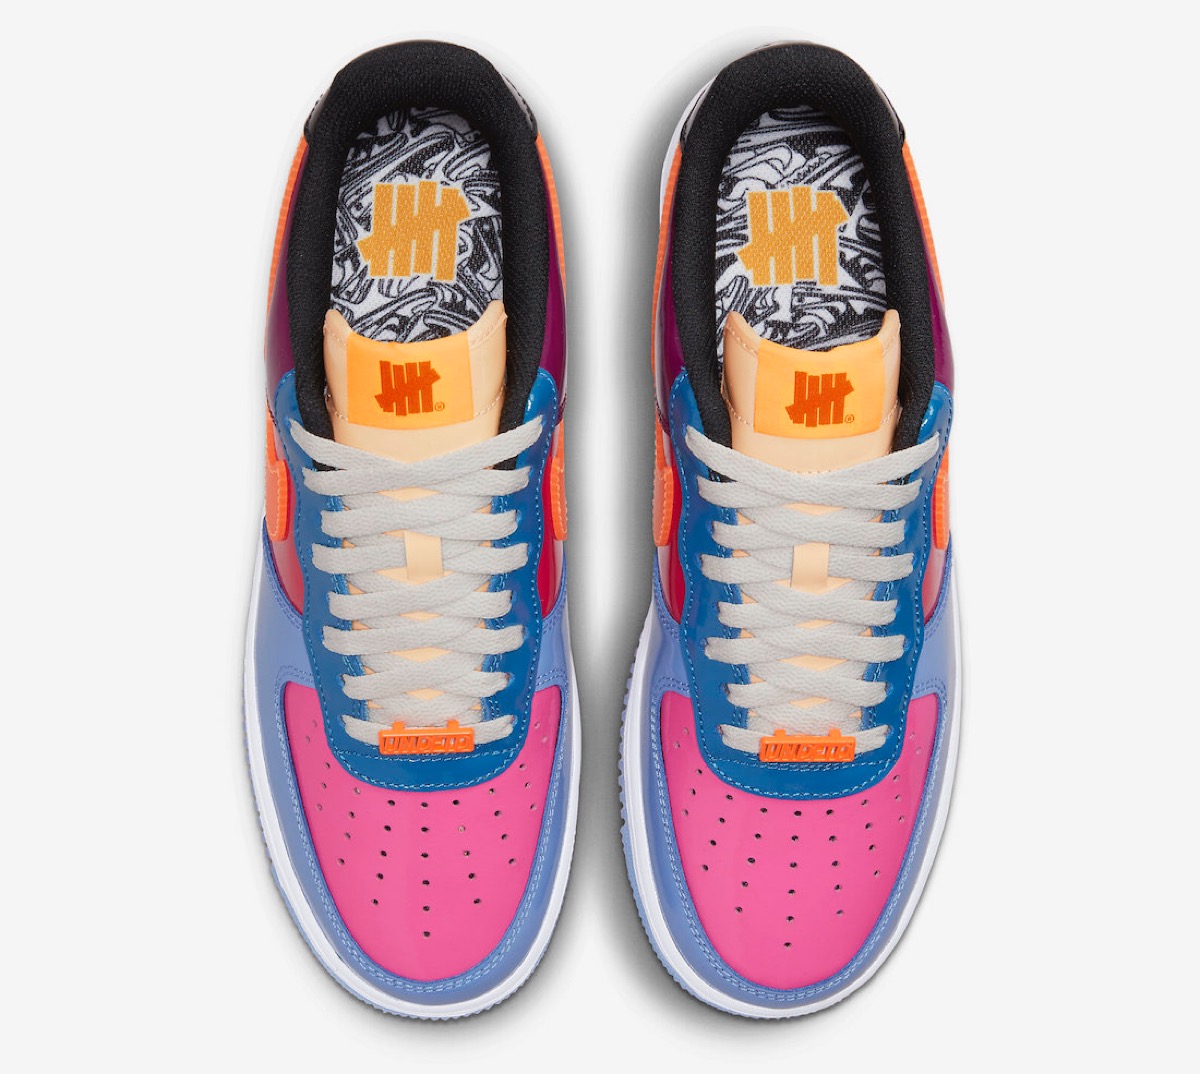 Undefeated × Nike Air Force 1 Low SP “Multi Patent” Collectionが